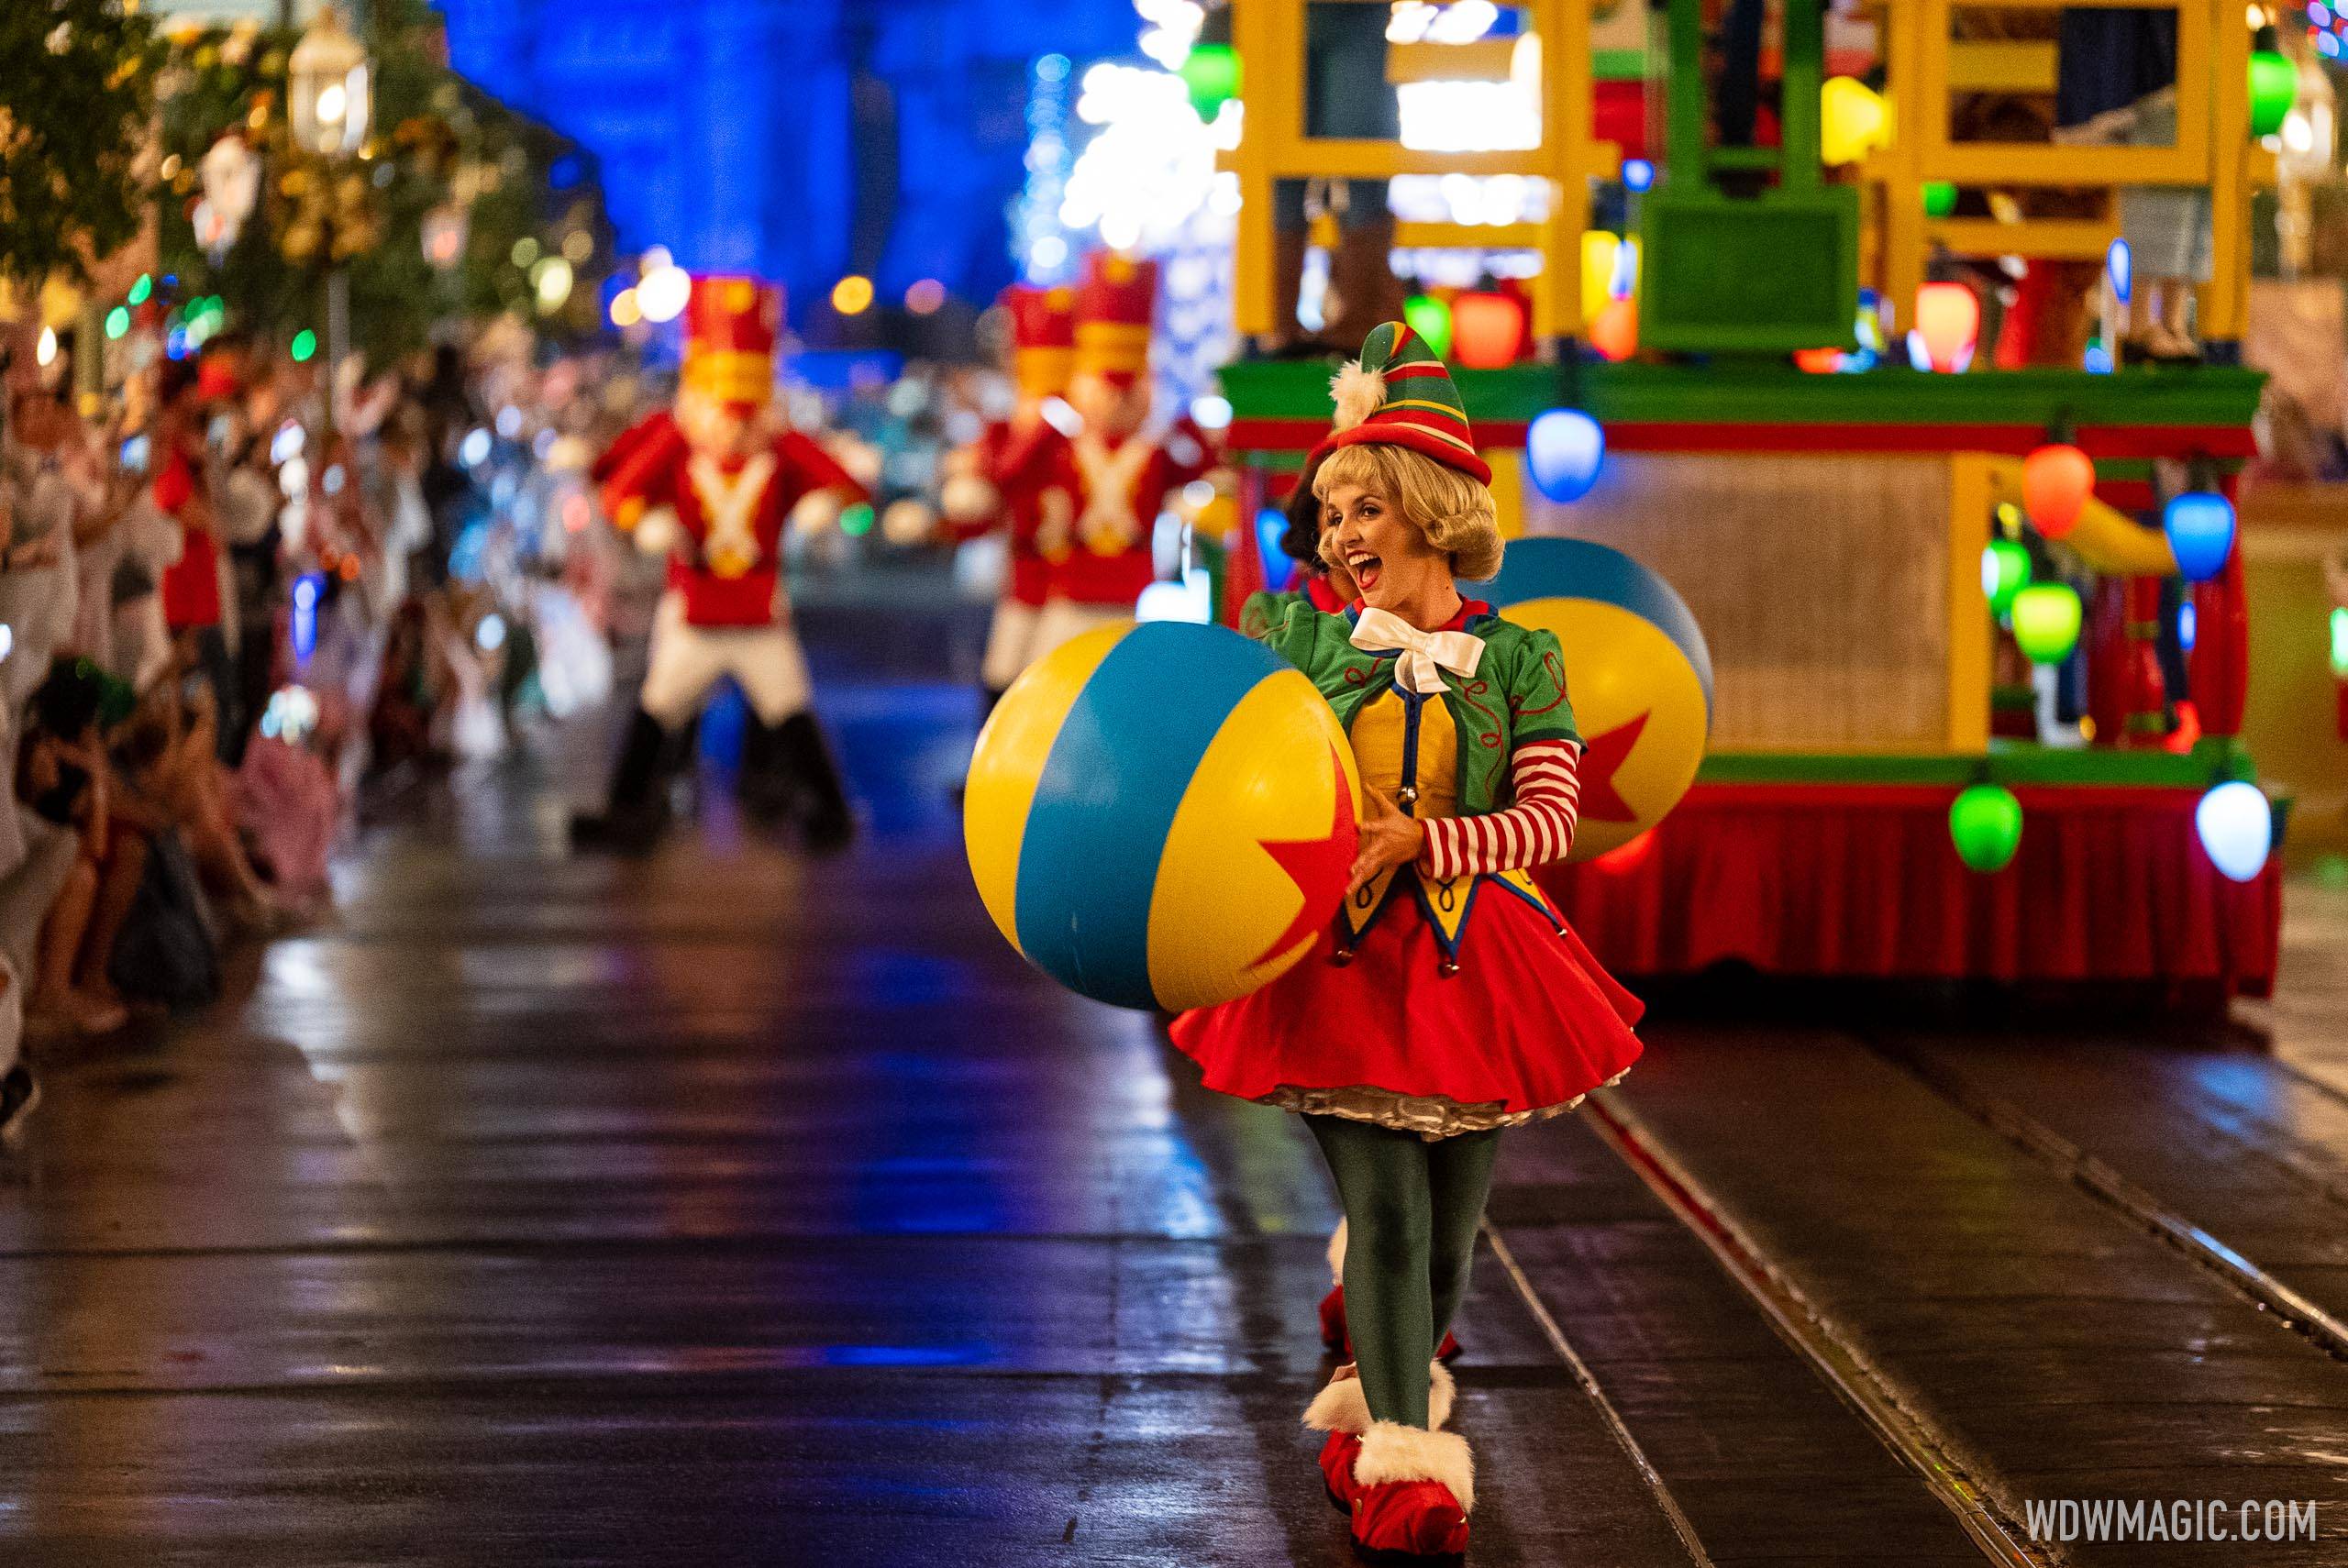 Mickey’s Once Upon a Christmastime Parade to be shown during regular park hours from the 20th